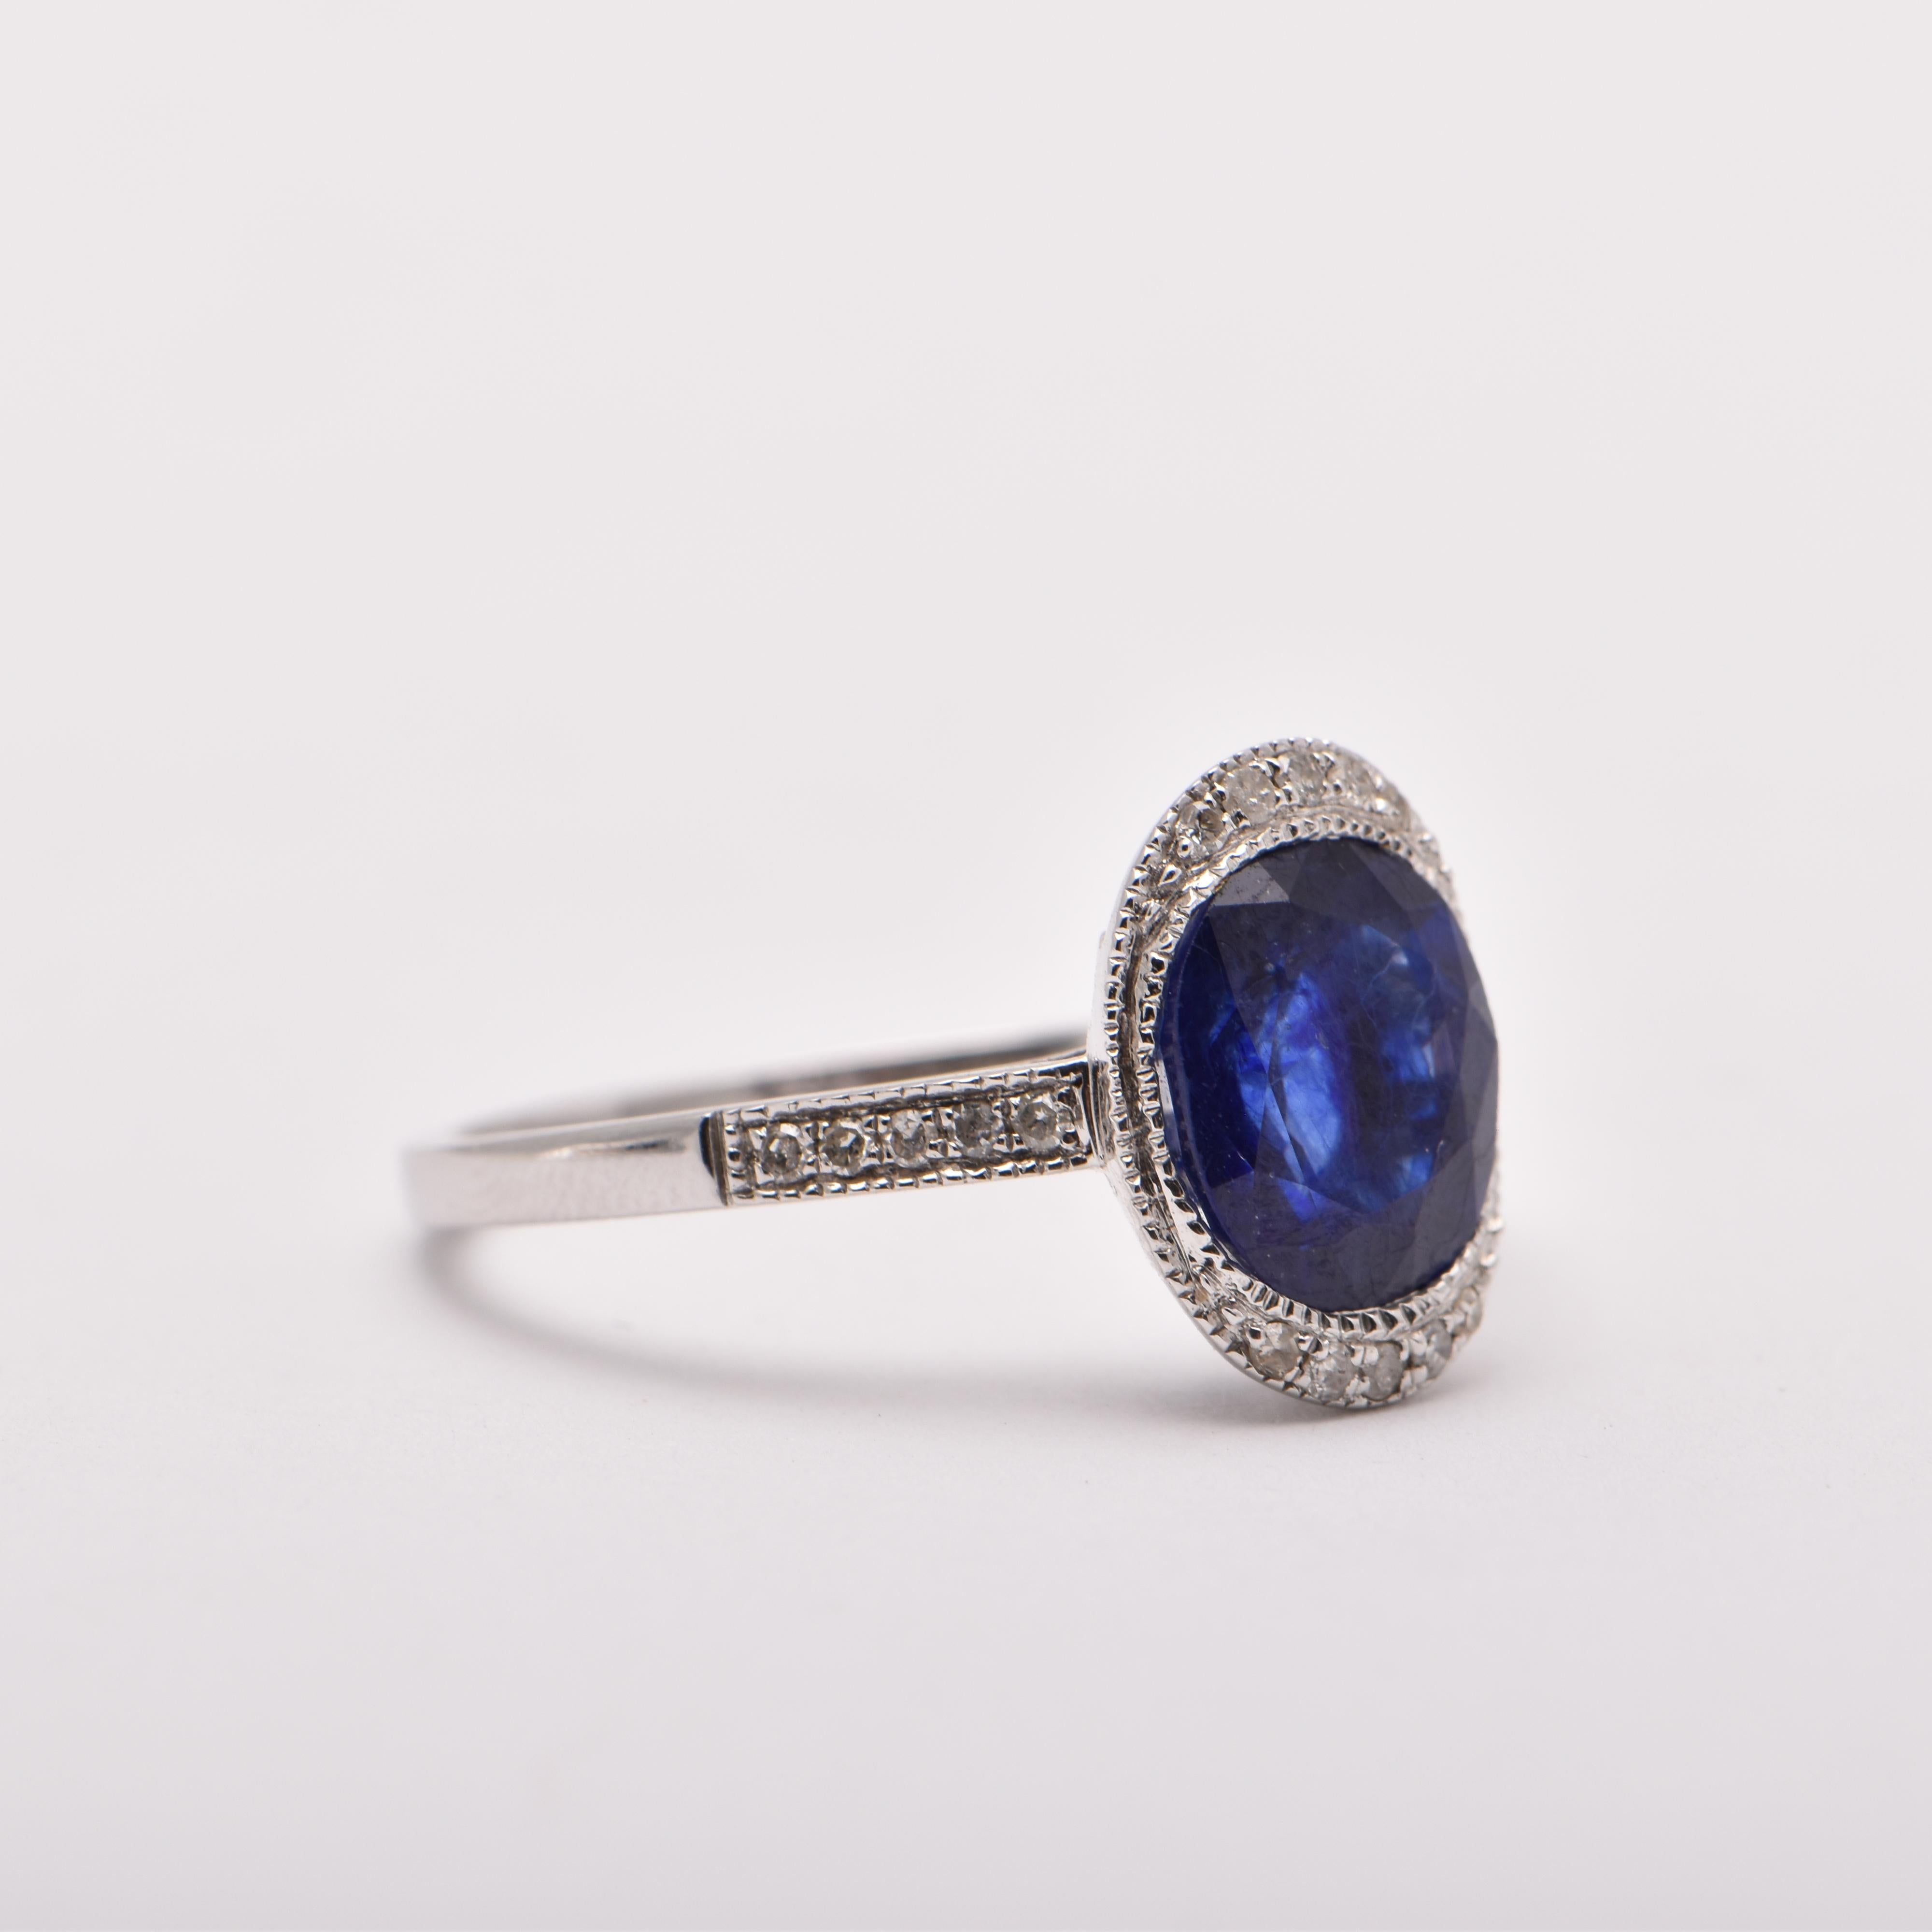 Oval Sapphire (Treated) and Diamond Cocktail Ring in 18 Carat White Gold by Cartmer Jewellery

Size N

Treated (Glass Filled) Sapphire 2.76 Carats
20 Diamonds totalling 0.11 Carats
18 Carat White Gold Ring

FREE express postage usually 3-4 days